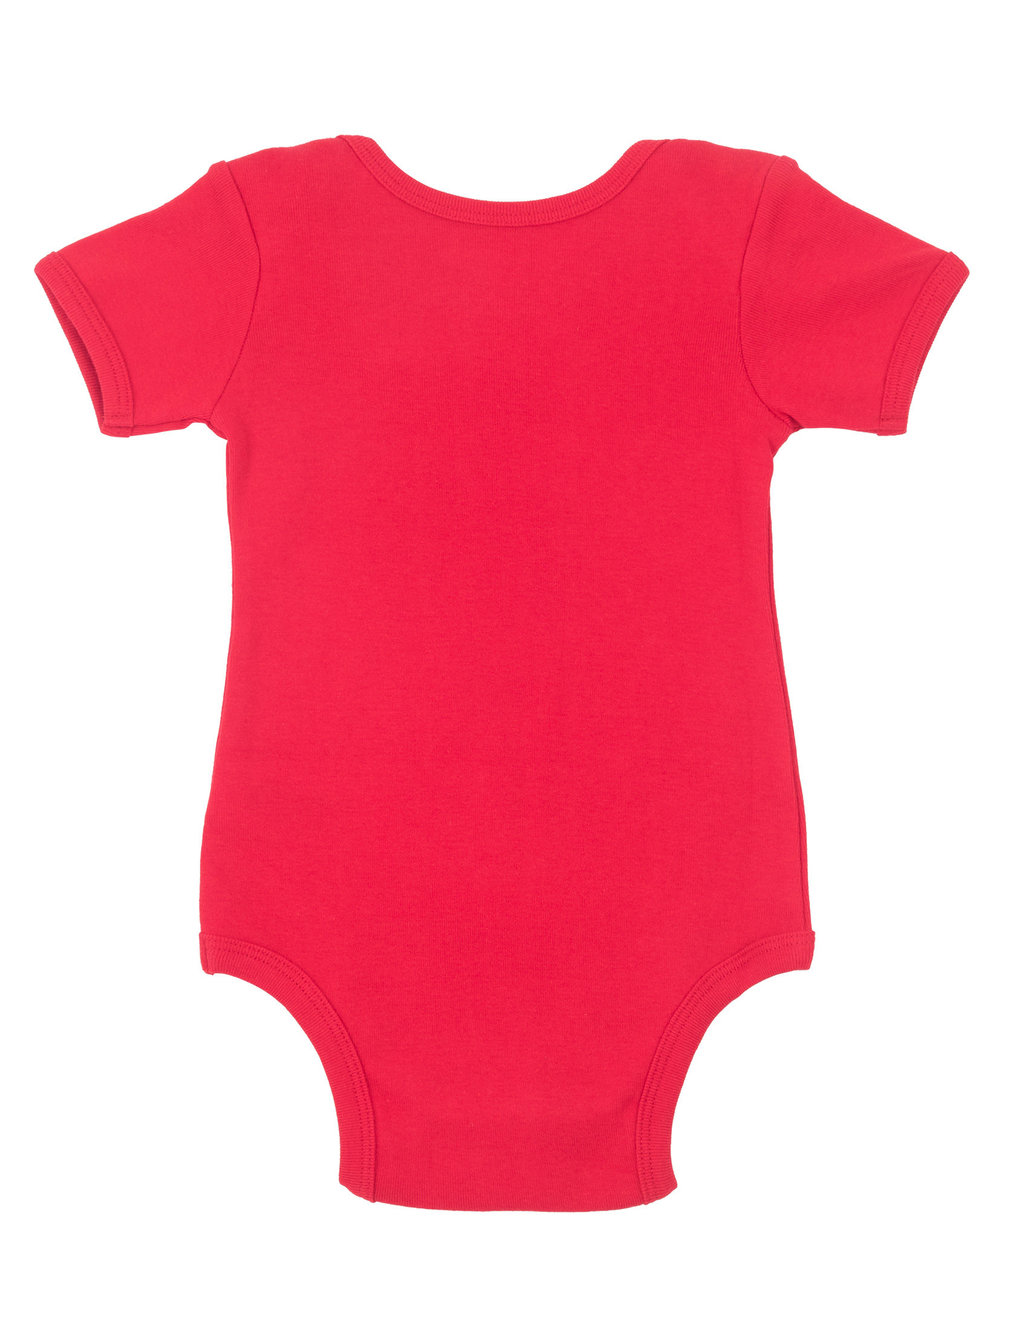 View larger image of Moose on Red Baby Bodysuit with Hat